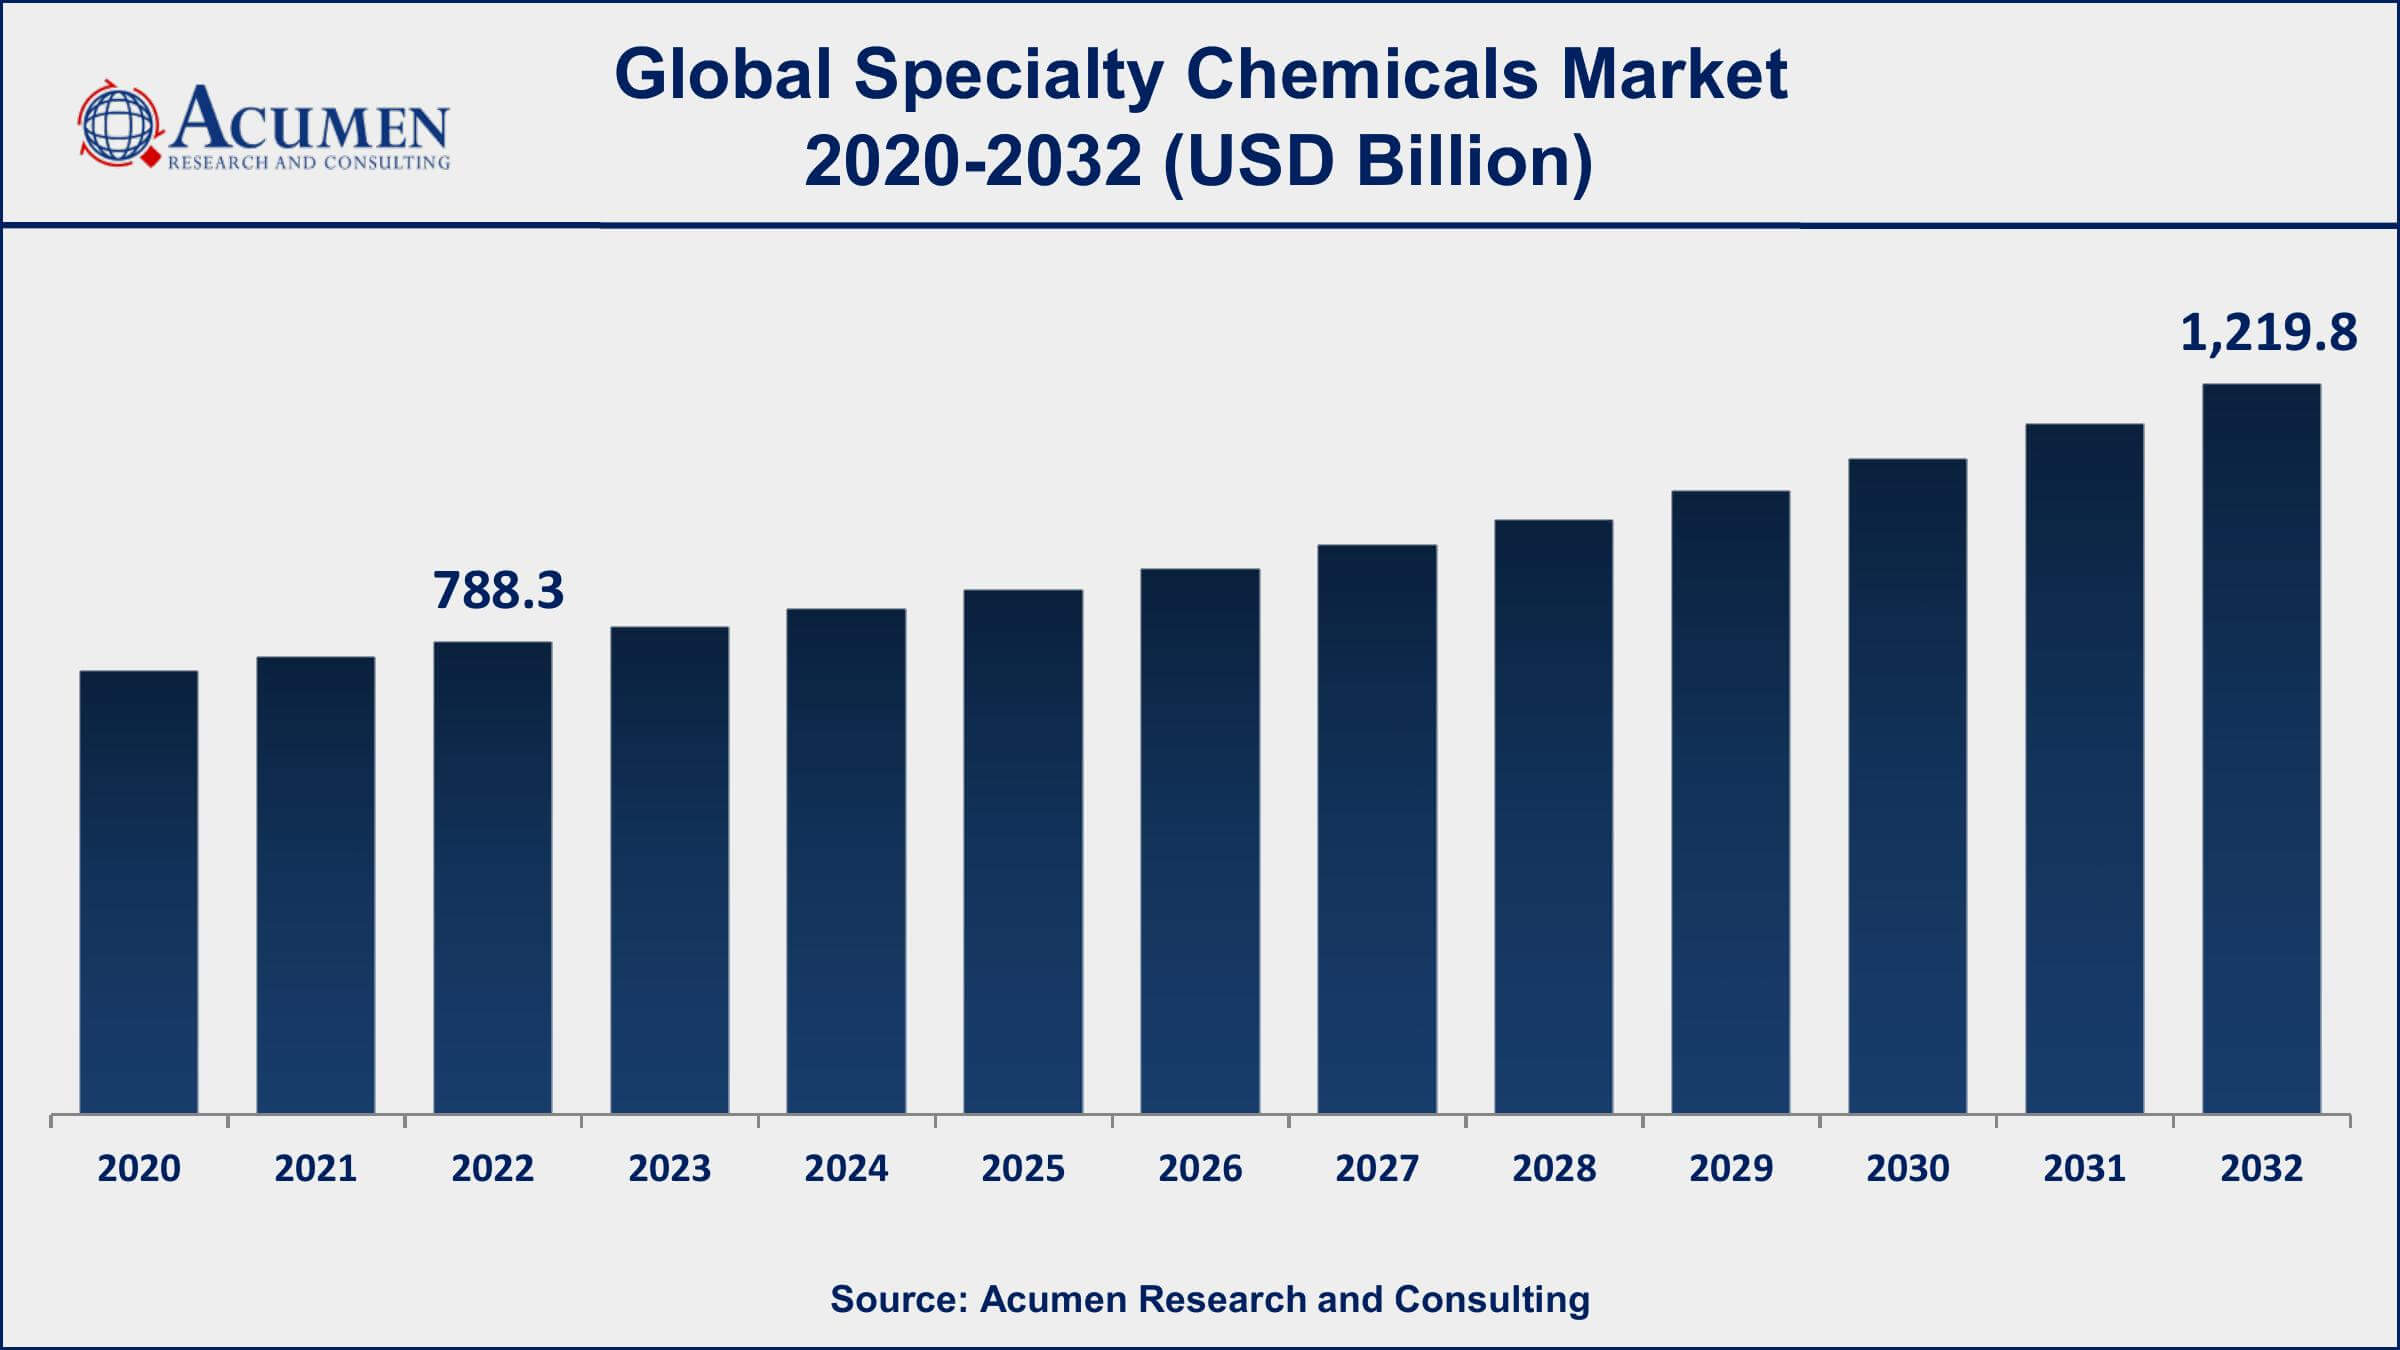 Specialty Chemicals Market Analysis Period